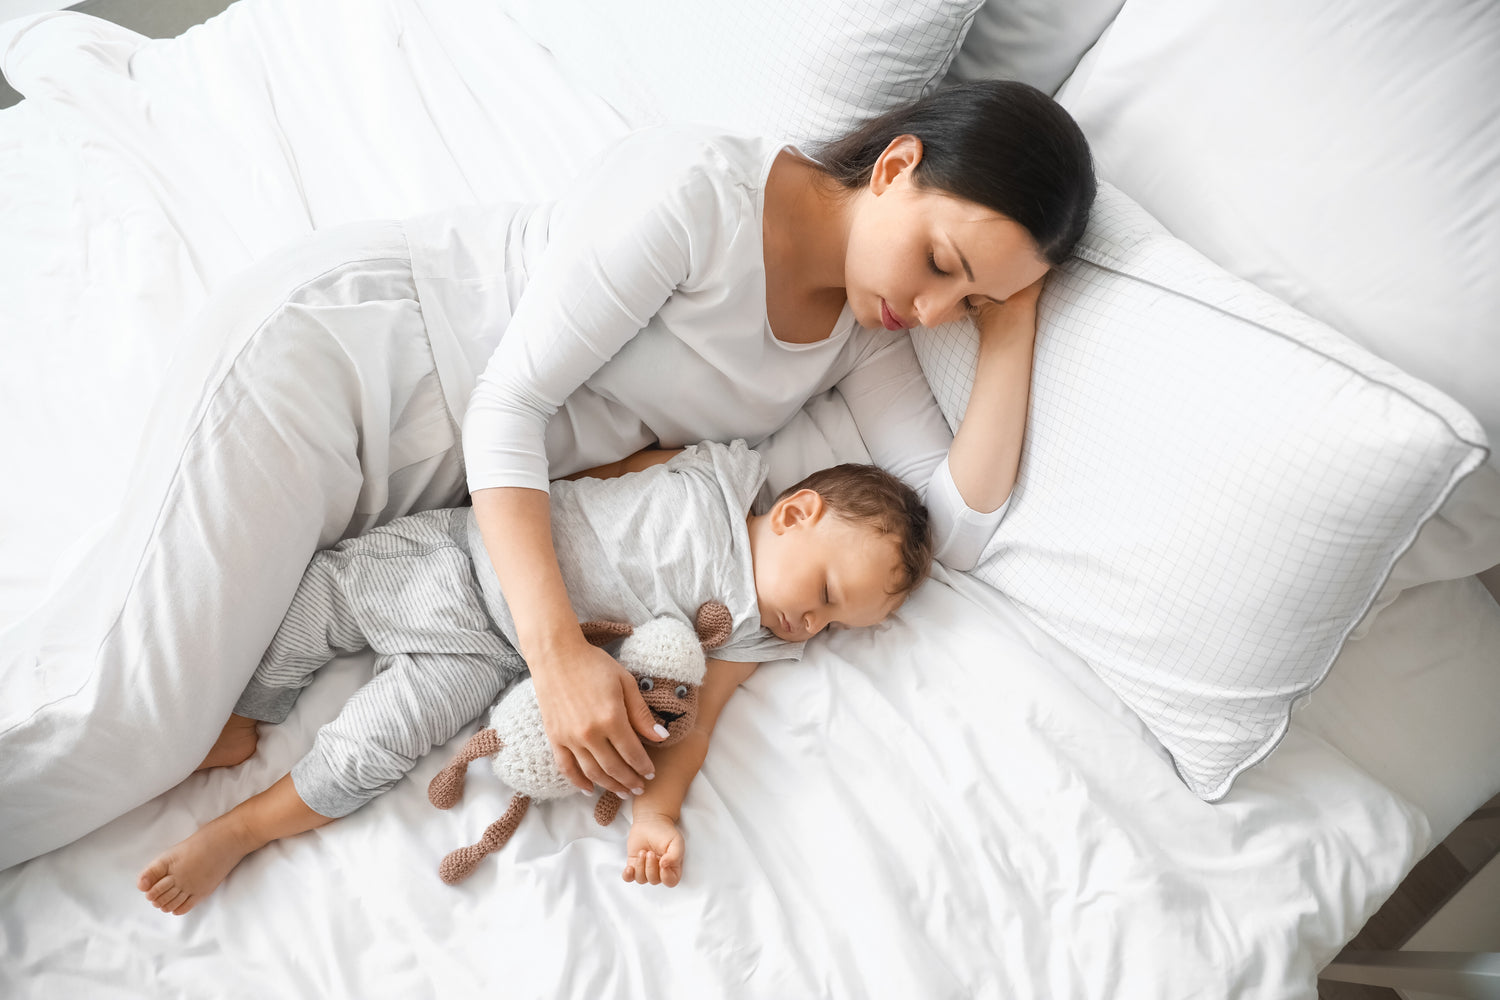 Children and Sleep: Healthy Sleep Habits For Your Child